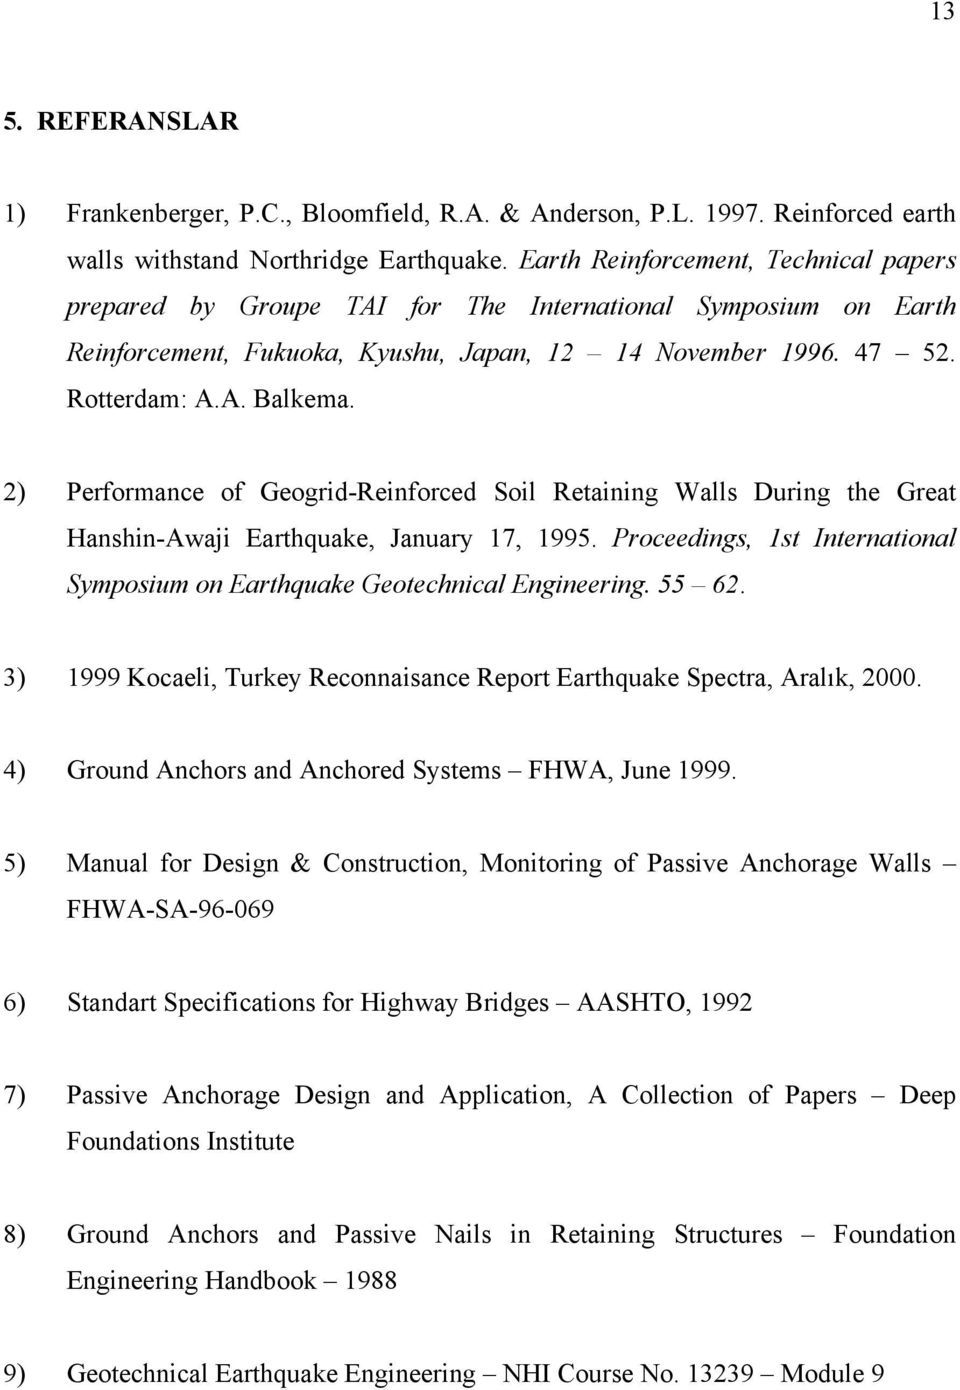 2) Performance of Geogrid-Reinforced Soil Retaining Walls During the Great Hanshin-Awaji Earthquake, January 17, 1995. Proceedings, 1st International Symposium on Earthquake Geotechnical Engineering.